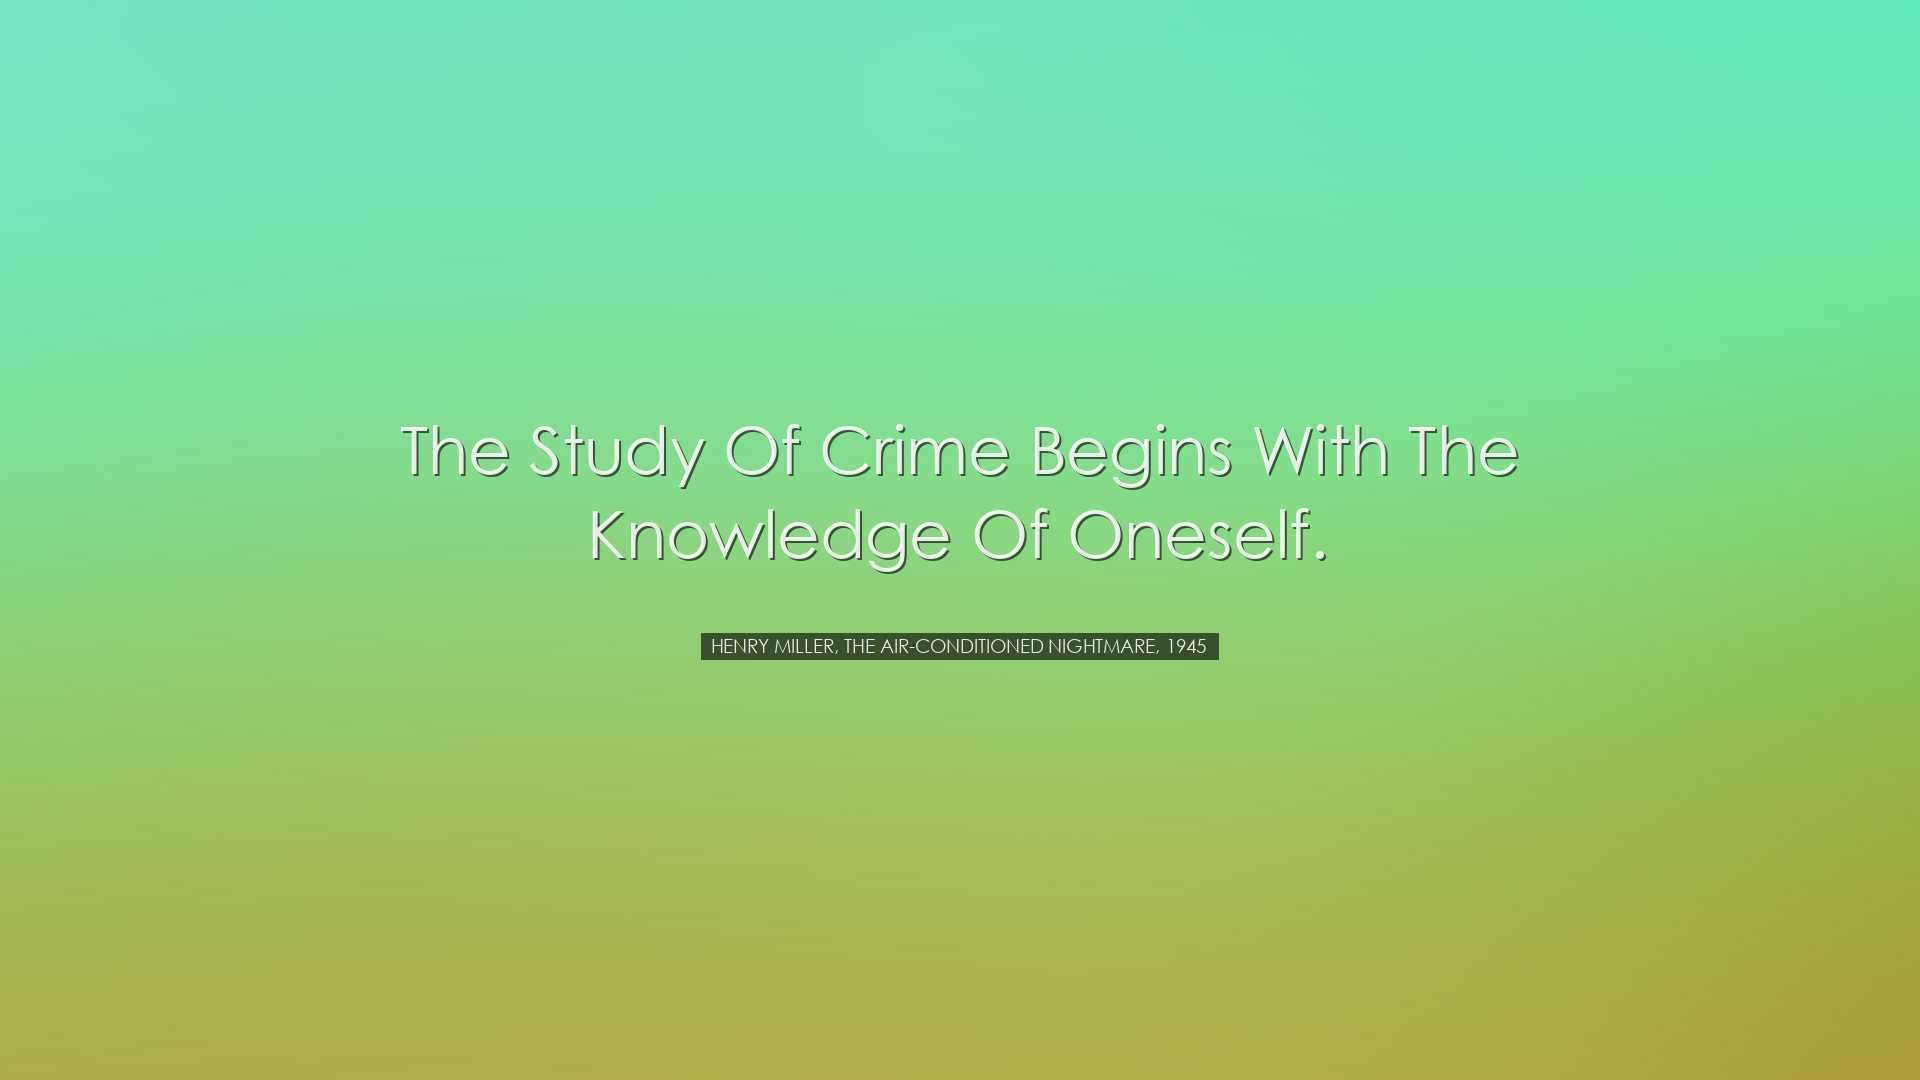 The study of crime begins with the knowledge of oneself. - Henry M